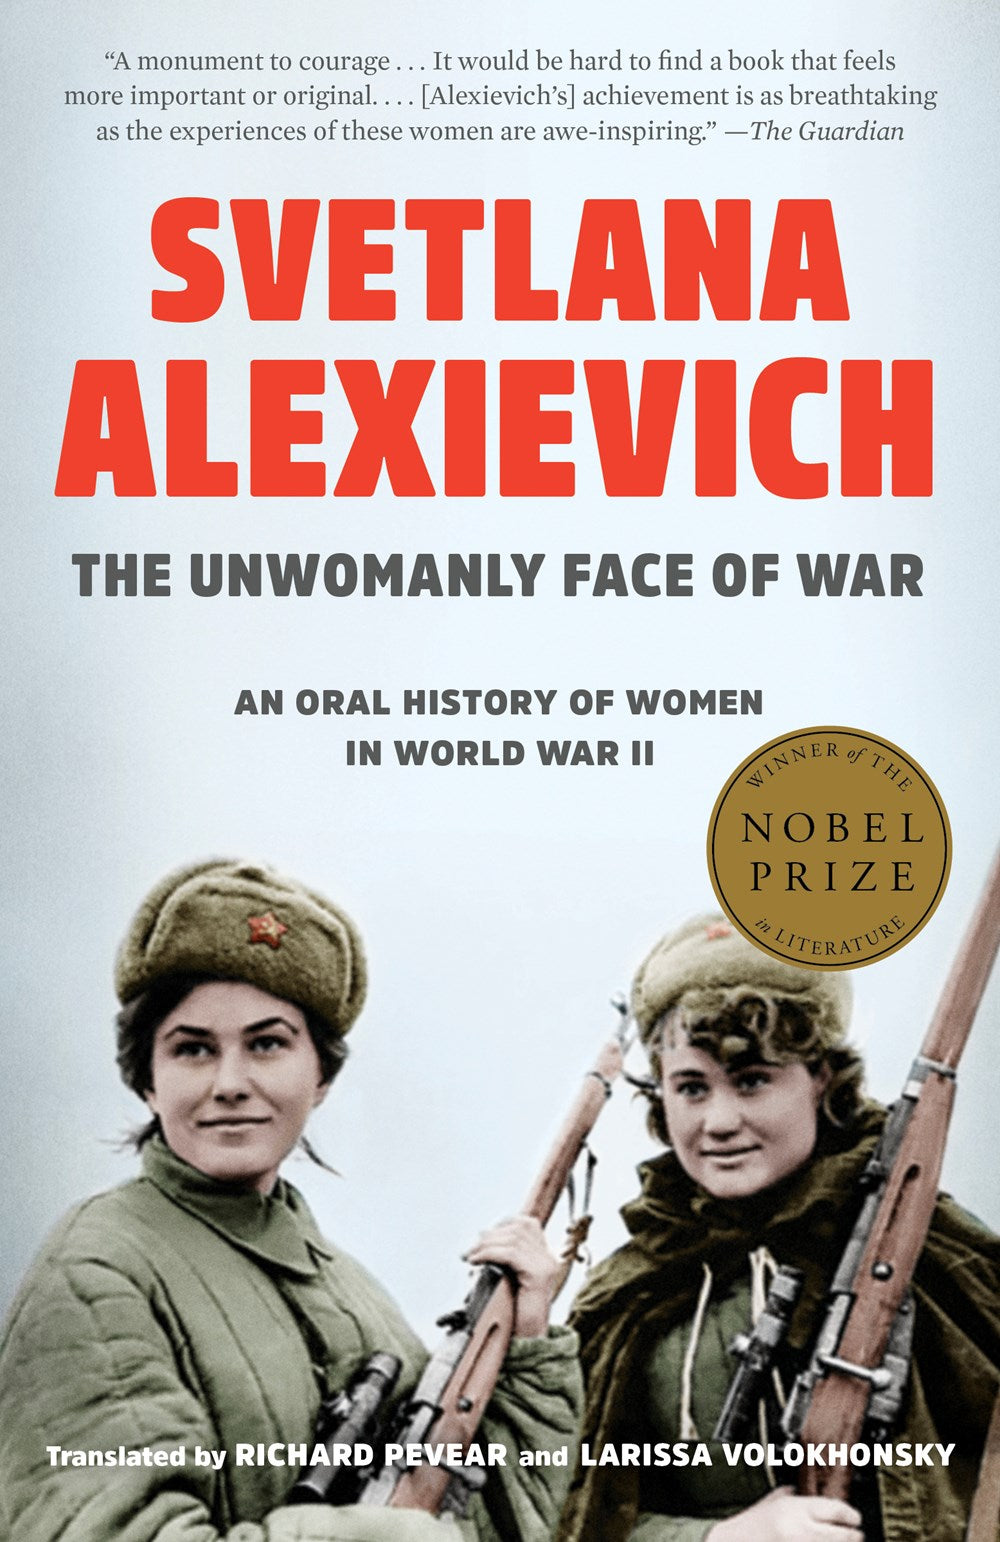 The Unwomanly Face of War: An Oral History of Women in WWII by Svetlana Alexievich (Translated by Richard Pevear & Larissa Volokhonsky)